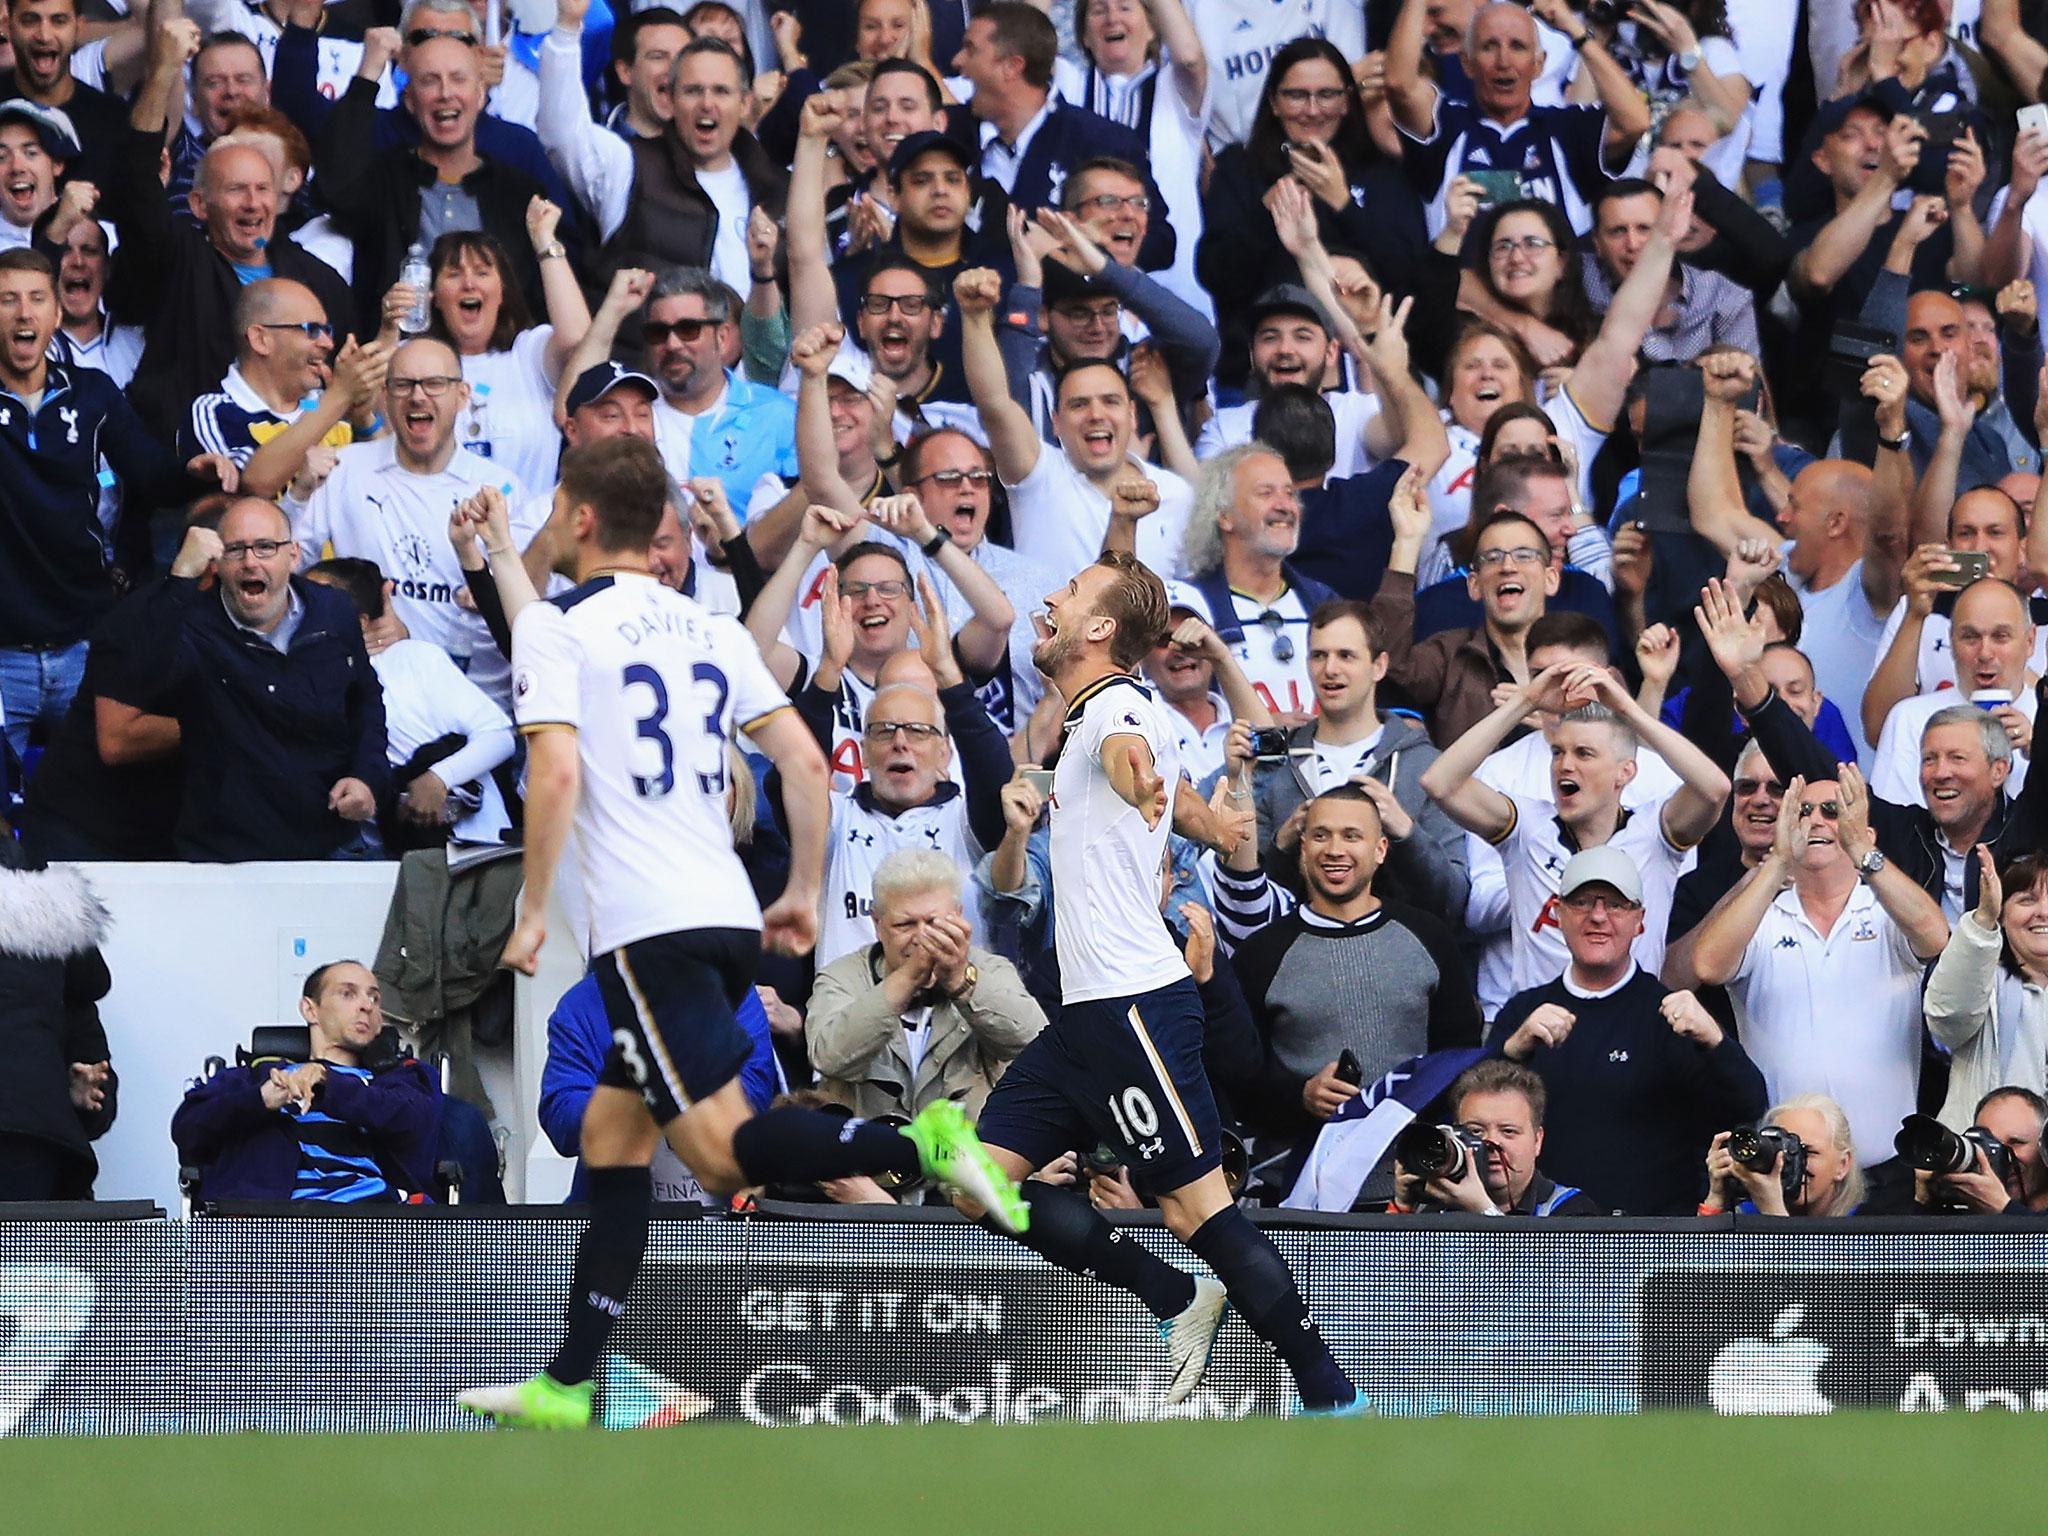 &#13;
Kane scored the last-ever Spurs goal at the Lane (Getty)&#13;